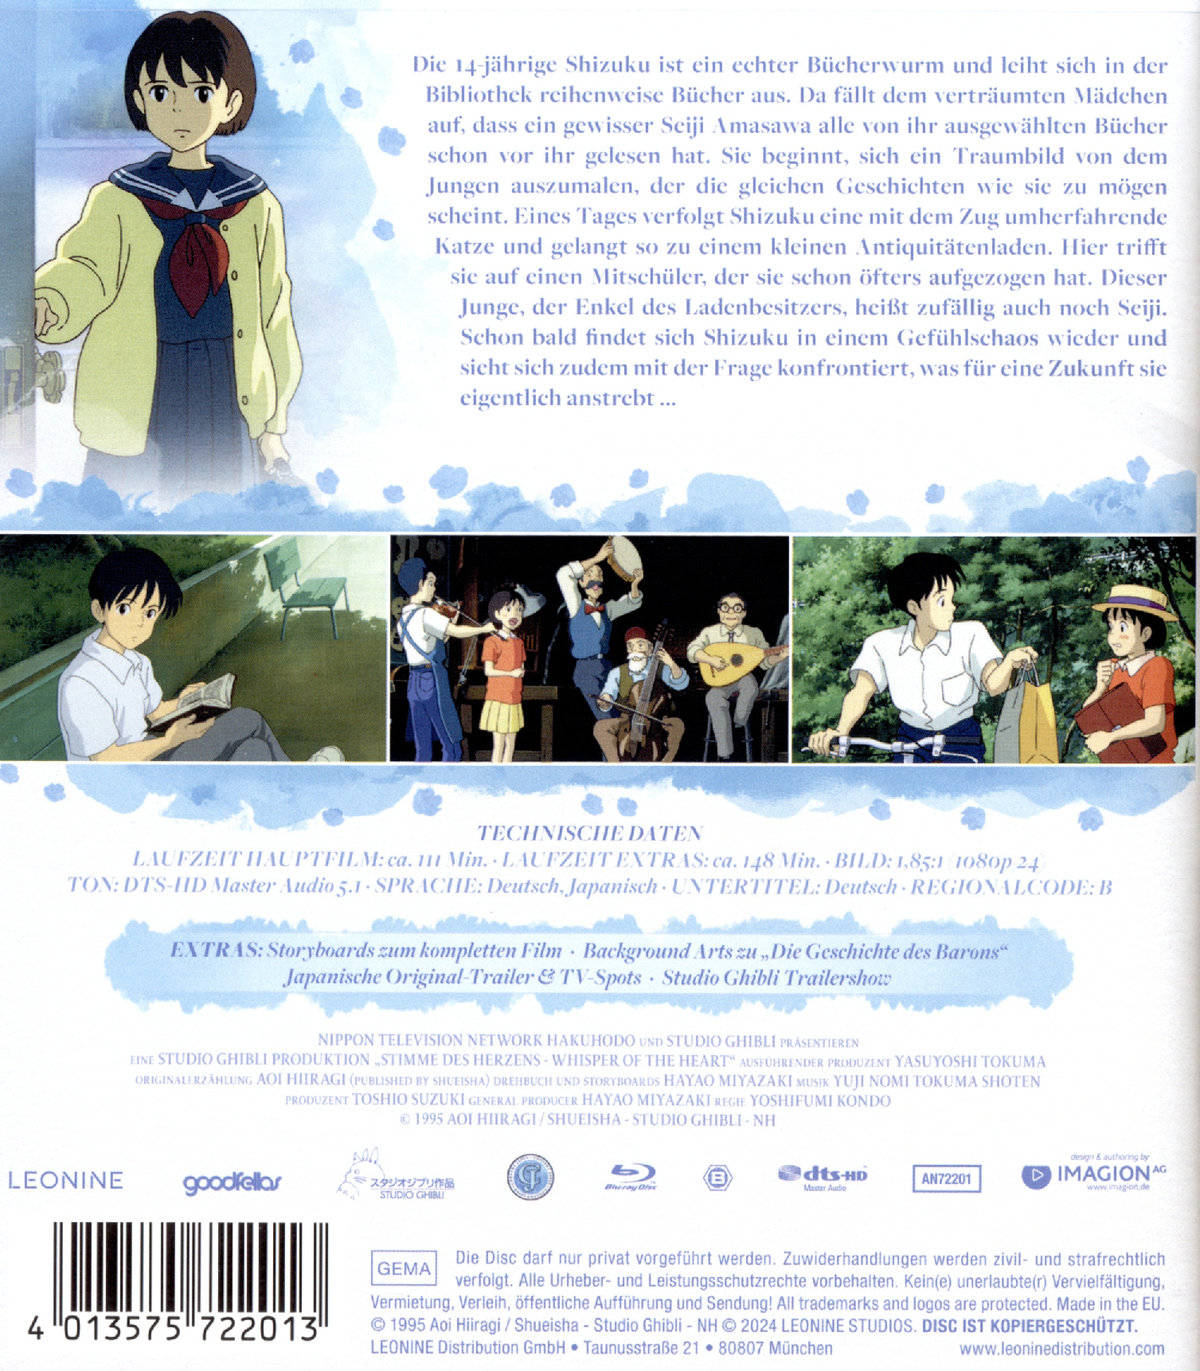 Stimme des Herzens - Whisper of the Heart - White Edition  (Blu-ray Disc)